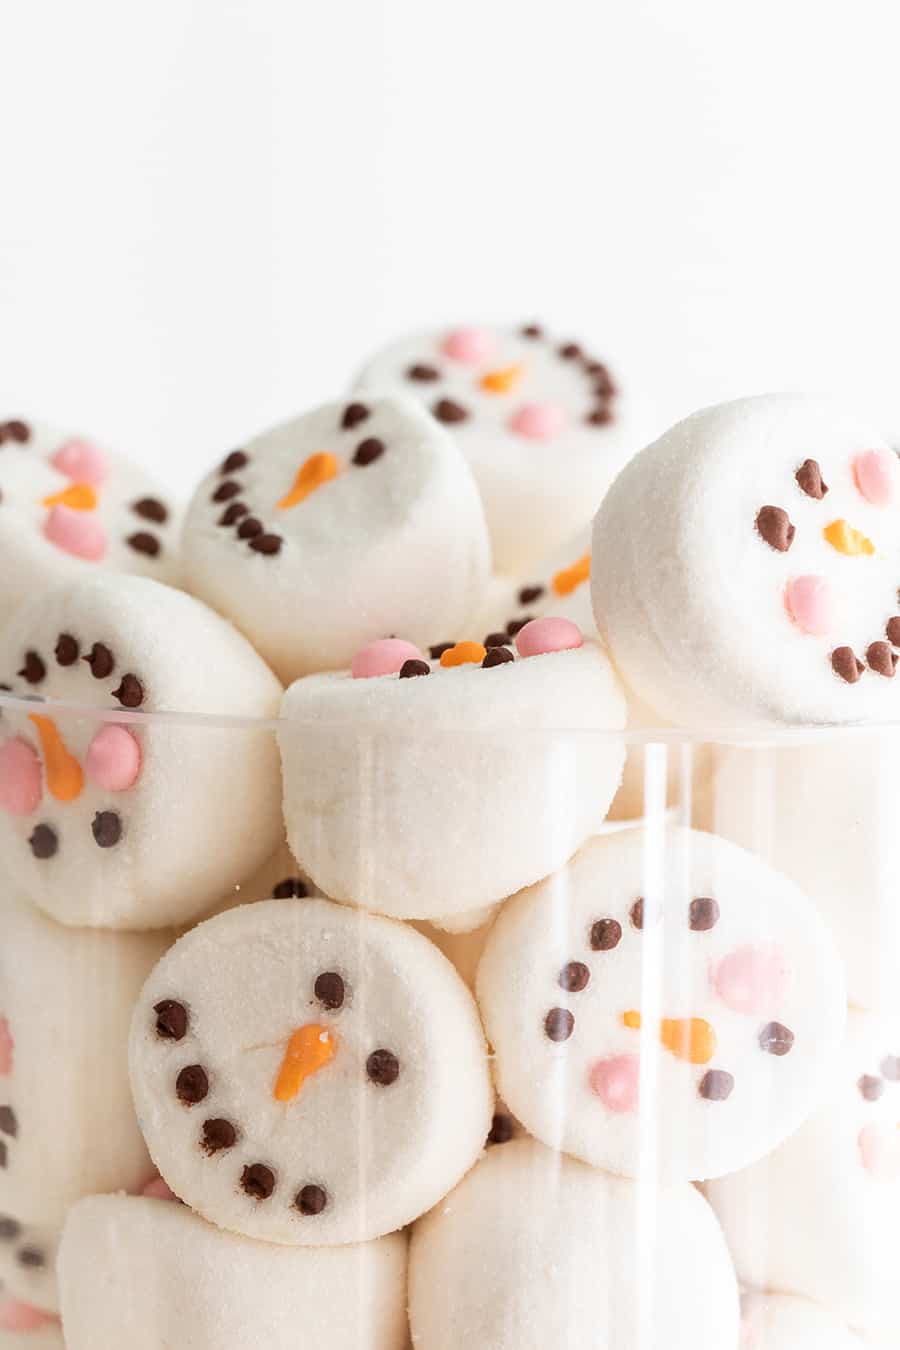 Marshmallow faces in a glass vase.